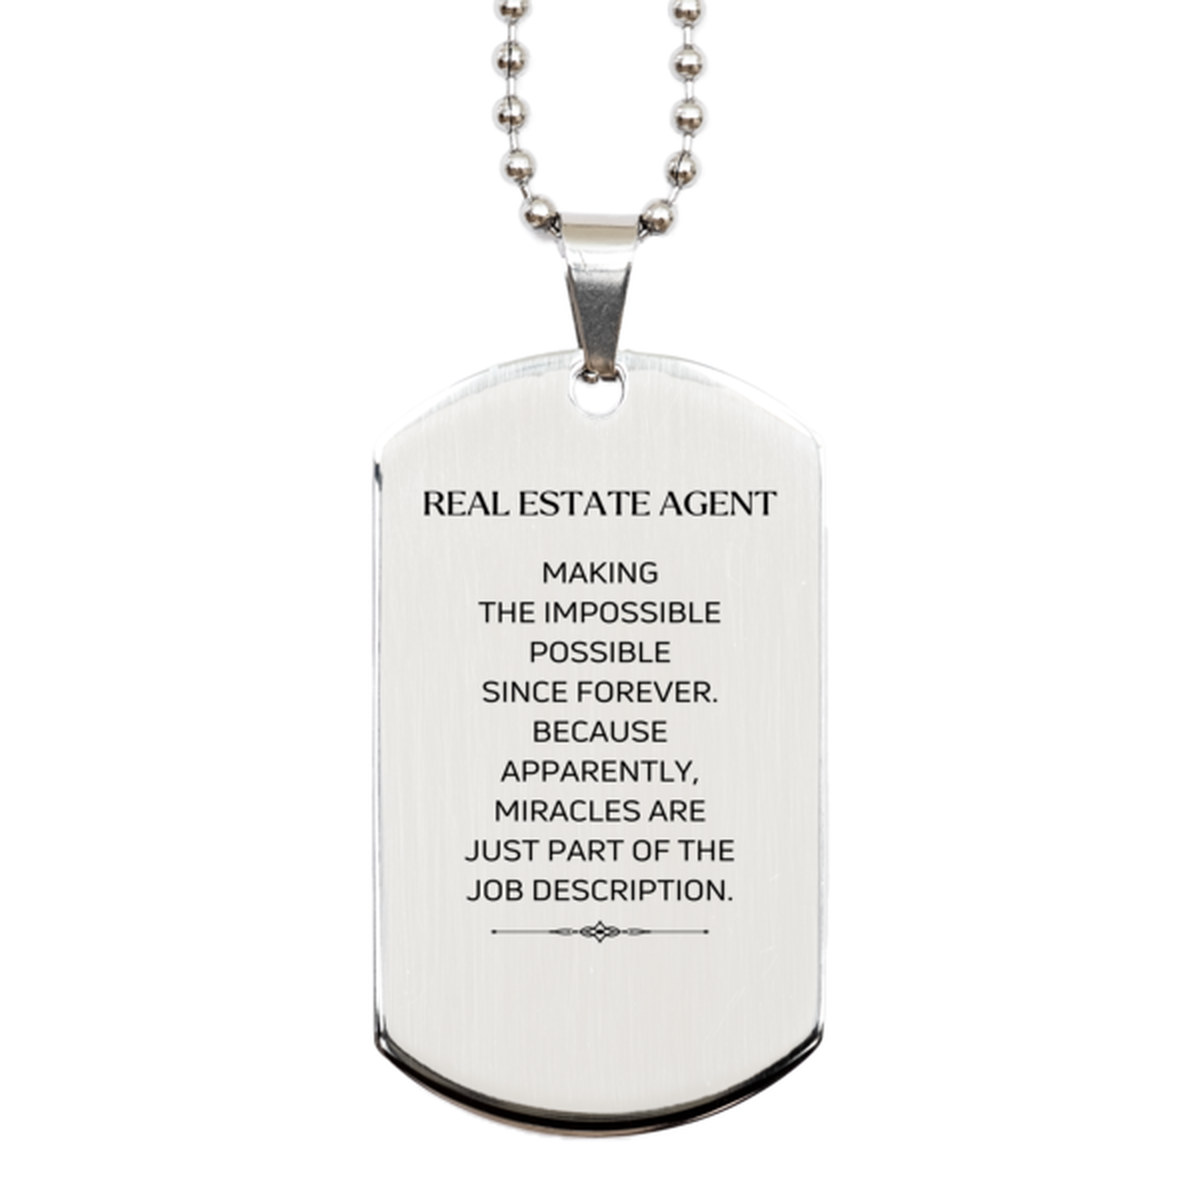 Funny Real Estate Agent Gifts, Miracles are just part of the job description, Inspirational Birthday Silver Dog Tag For Real Estate Agent, Men, Women, Coworkers, Friends, Boss